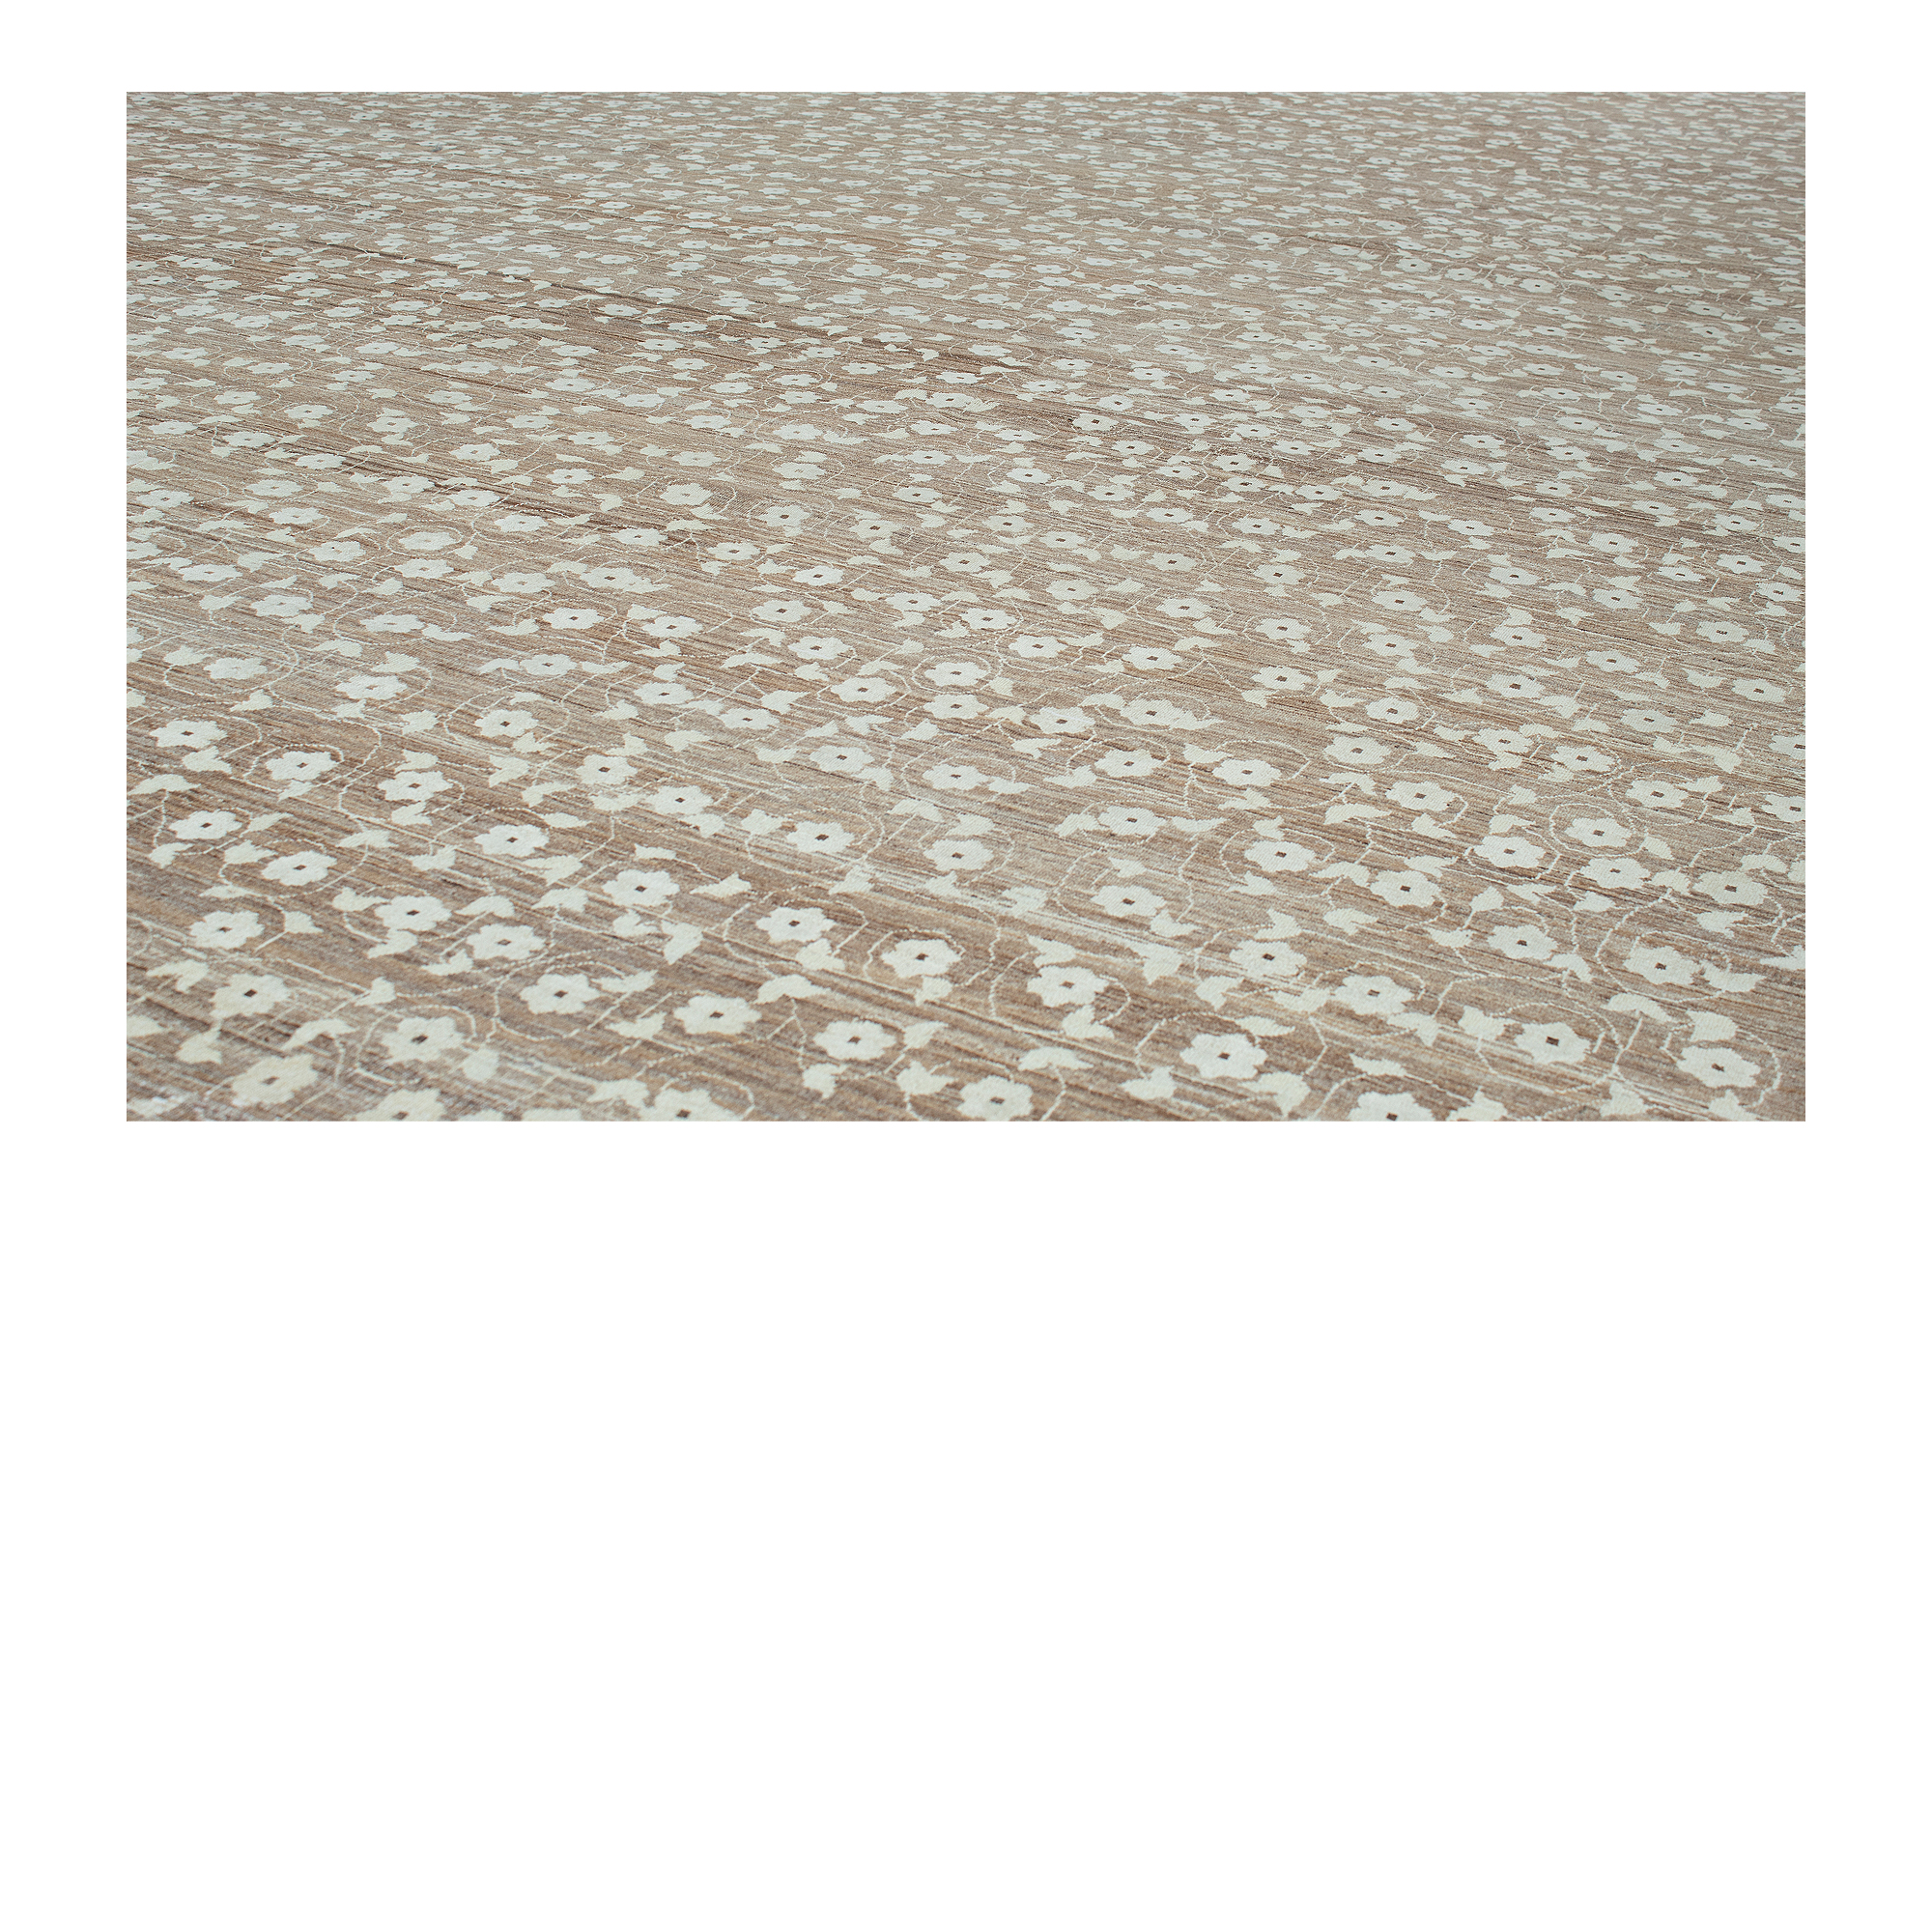 Our Floral rug is handknotted from the finest hand-carded, hand-spun, naturally dyed wool.